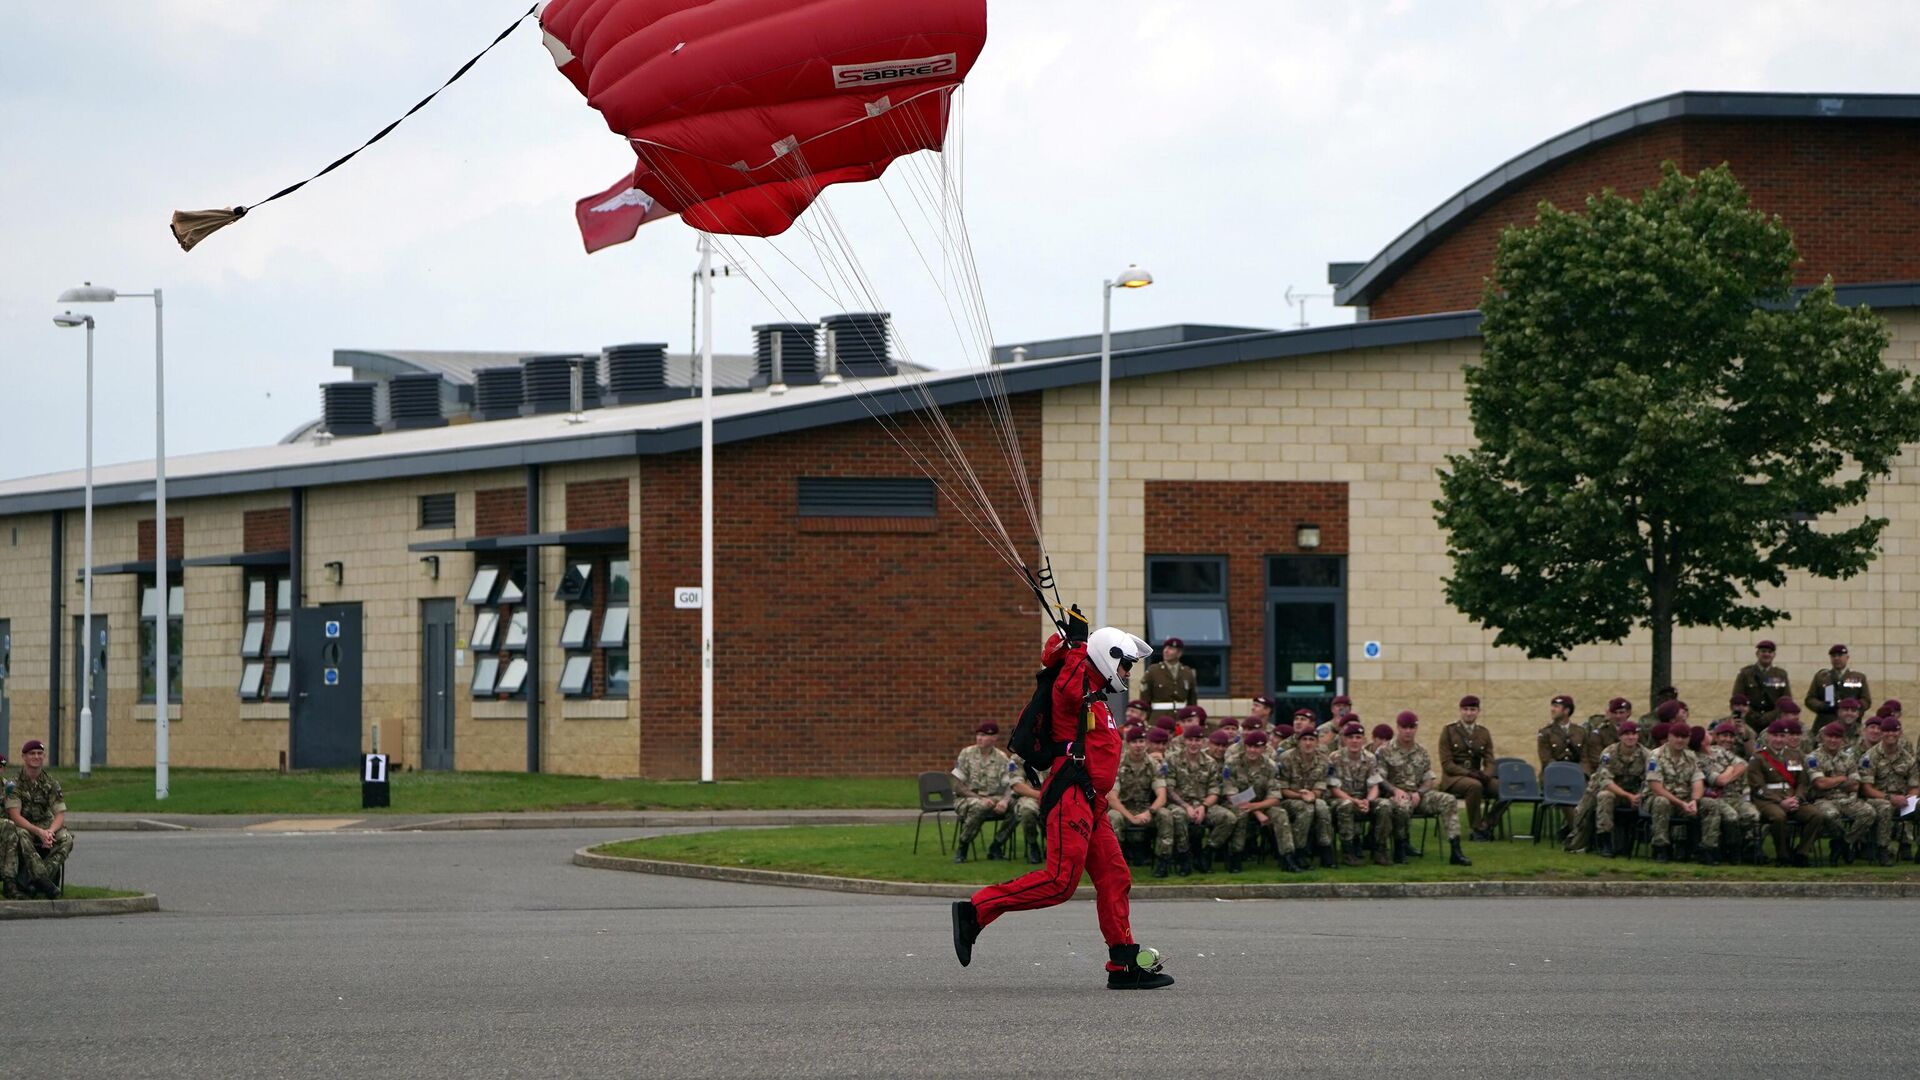 A member of the Red Devils, the Parachute Regiment's parachute display team lands during a ceremony to present new colours to the Parachute Regiment at Merville Barracks in Colchester on July 13, 2021 - Sputnik International, 1920, 07.06.2022